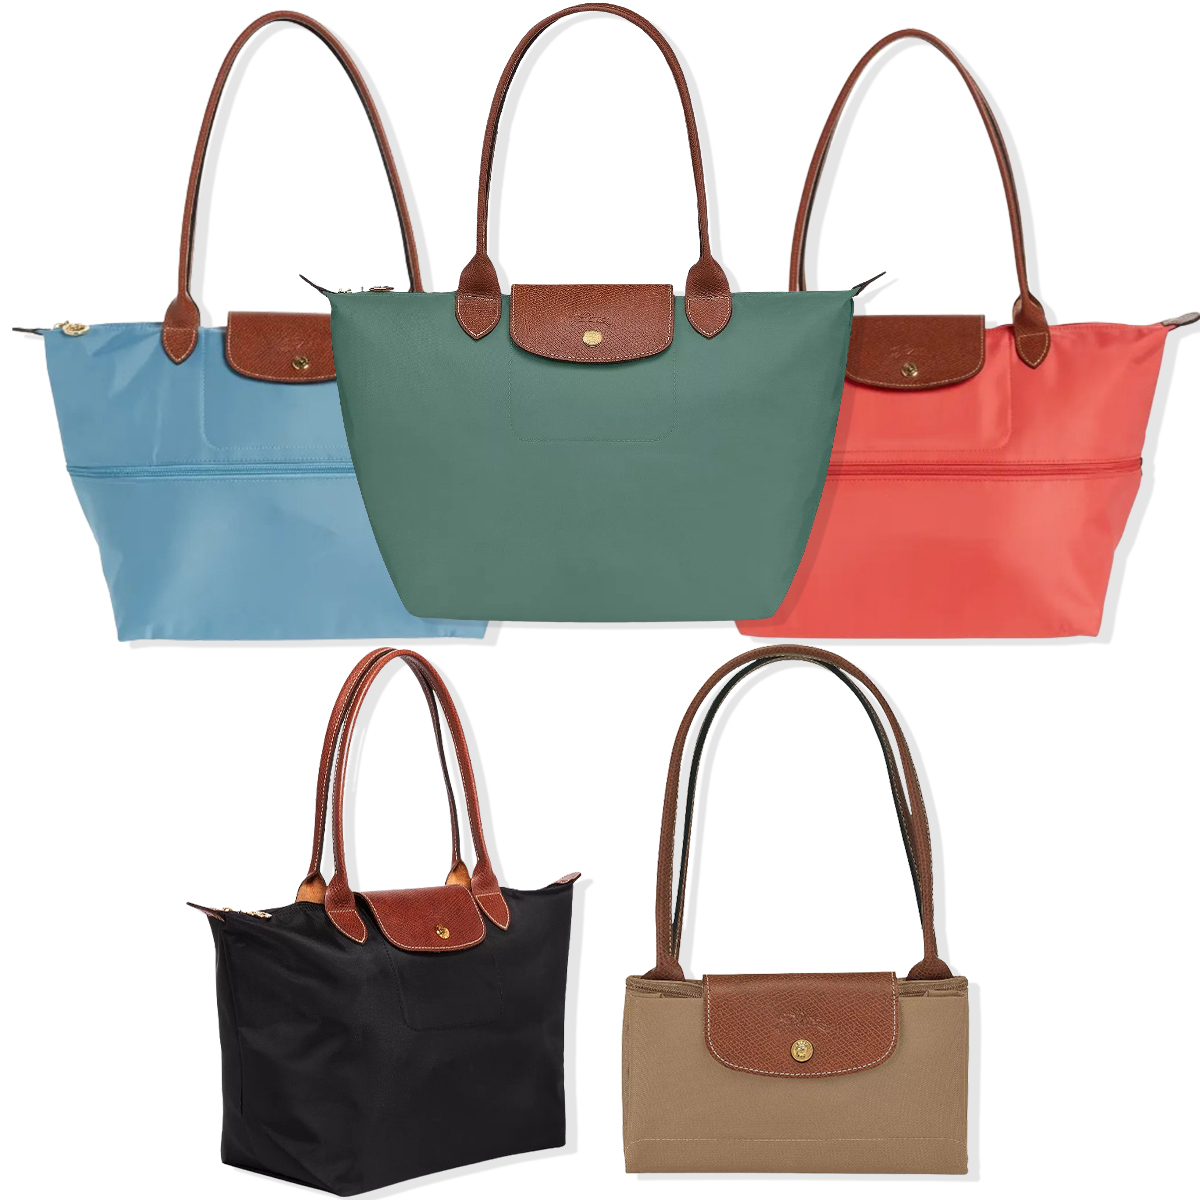 Longchamp Tote Bags and Backpacks Are Up to 60% Off at This Secret